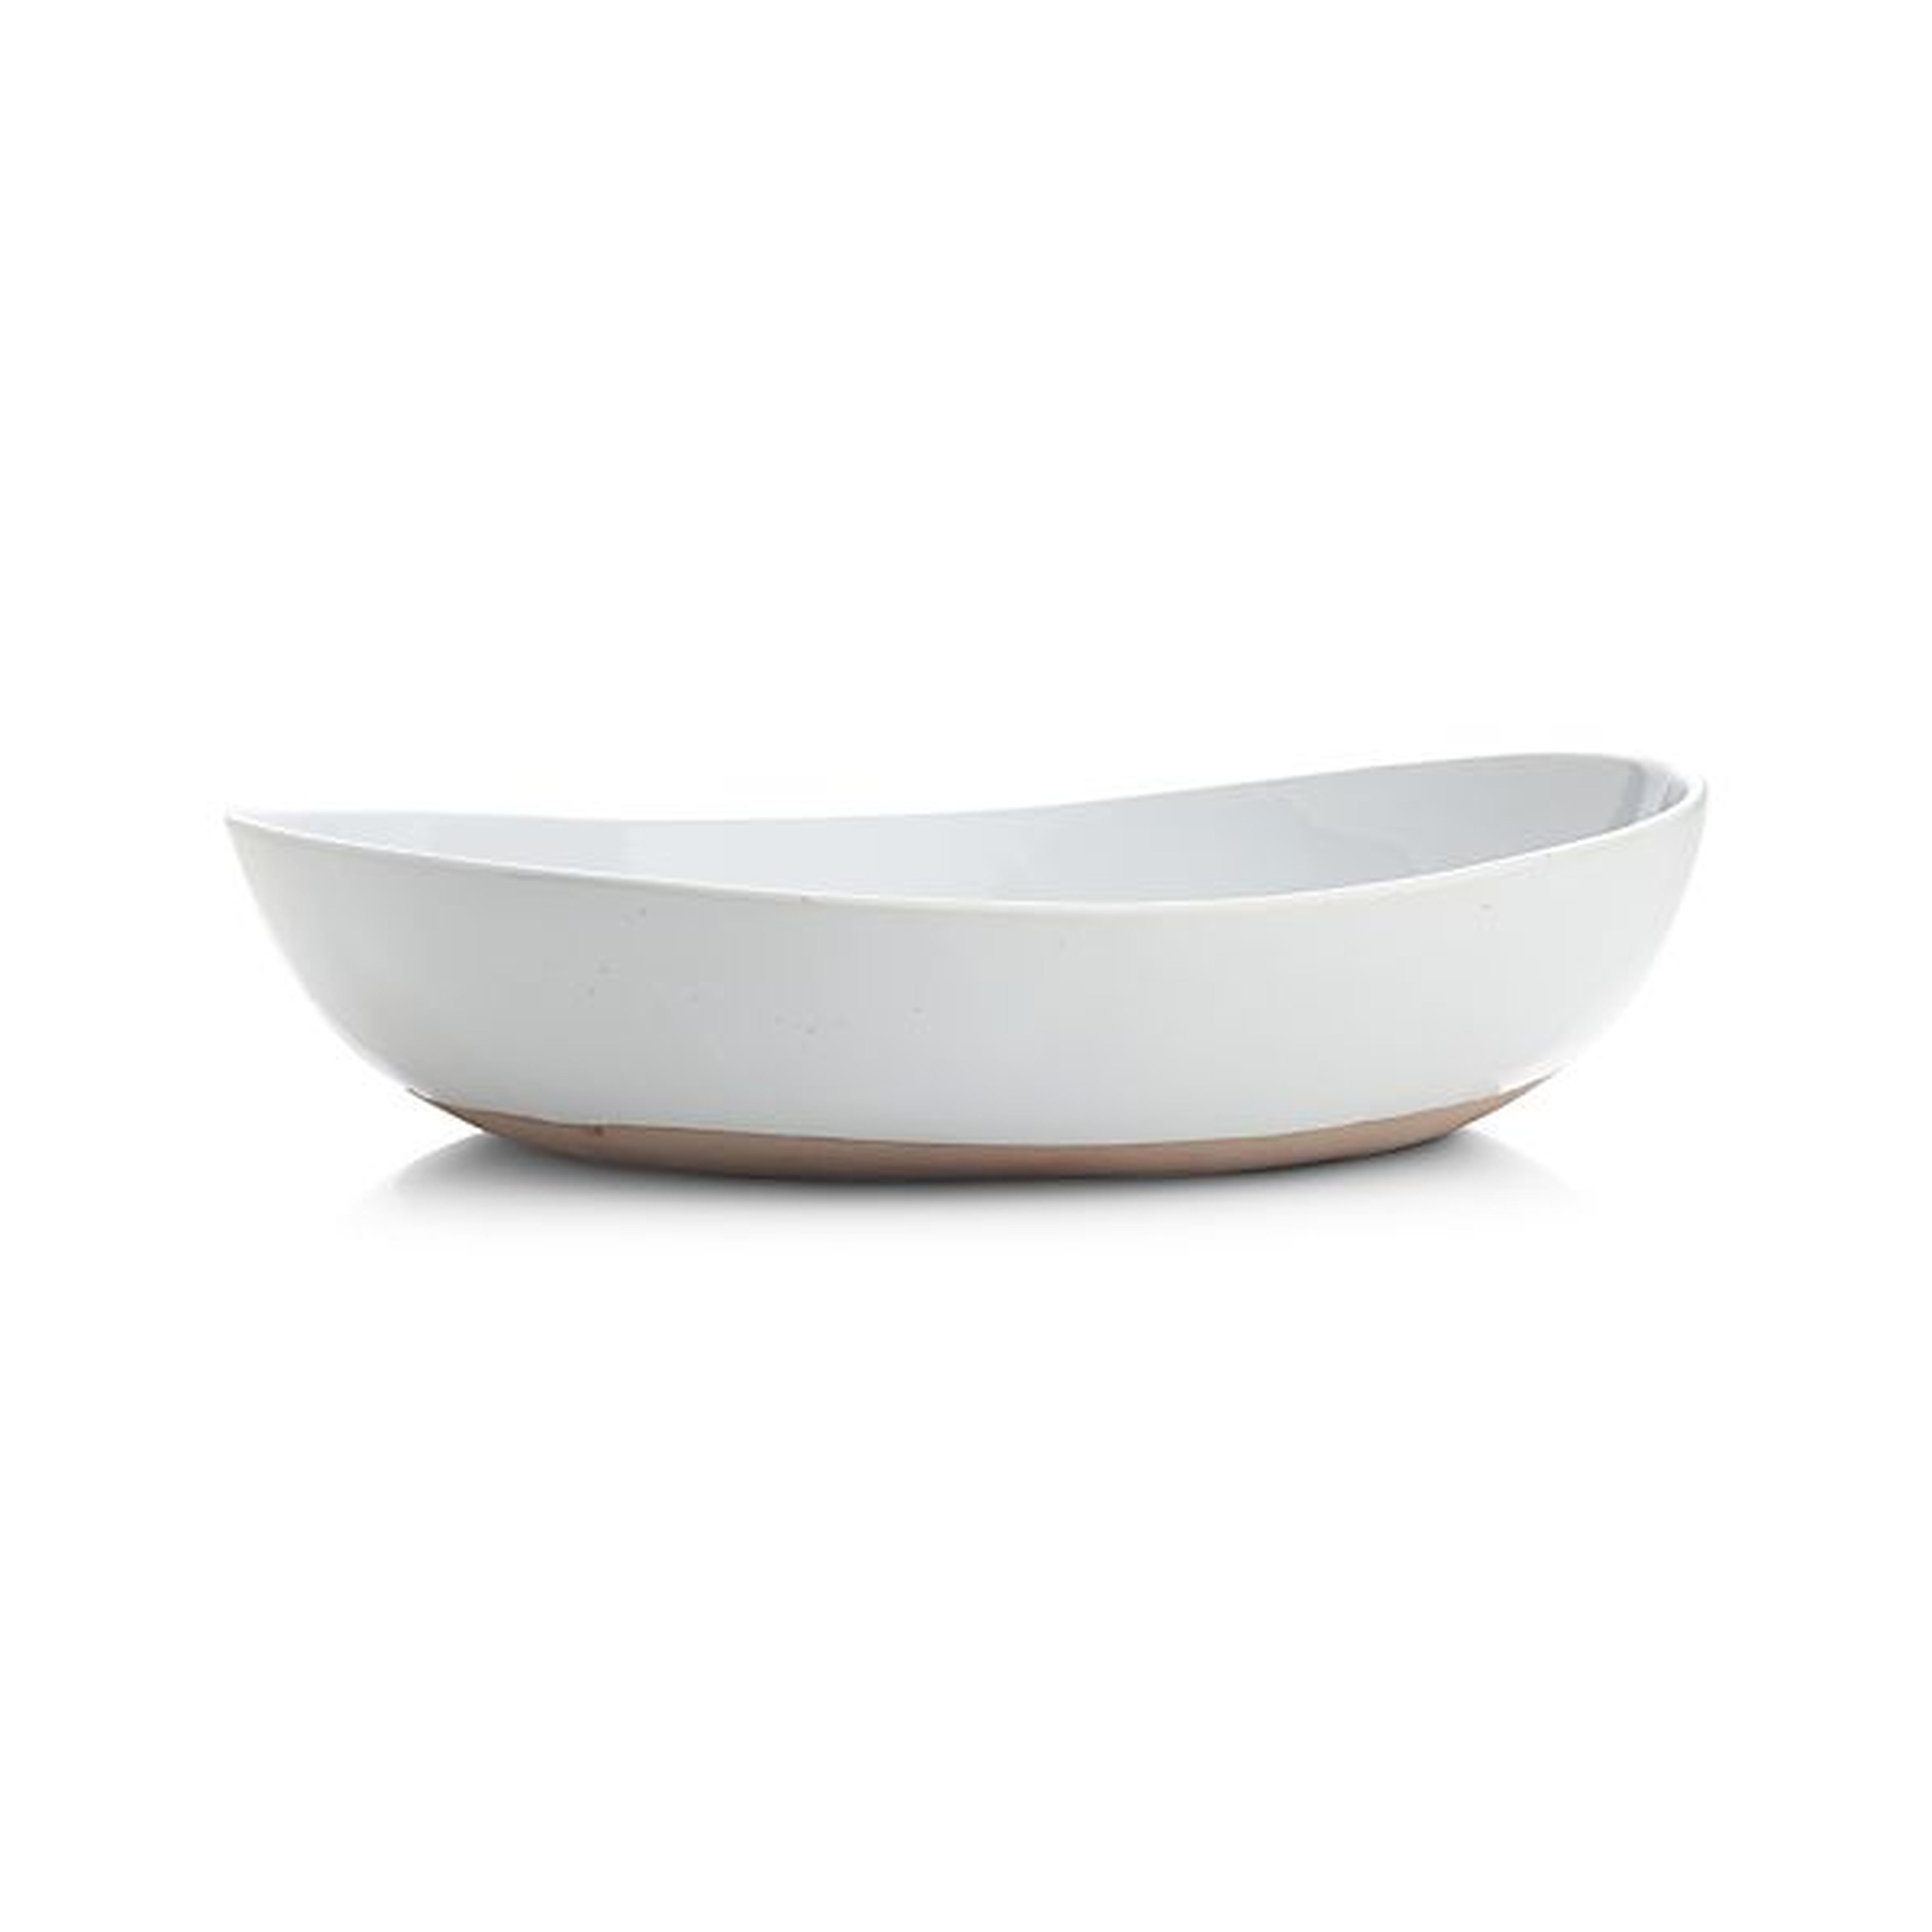 Welcome White Large Serving Bowl - Crate and Barrel